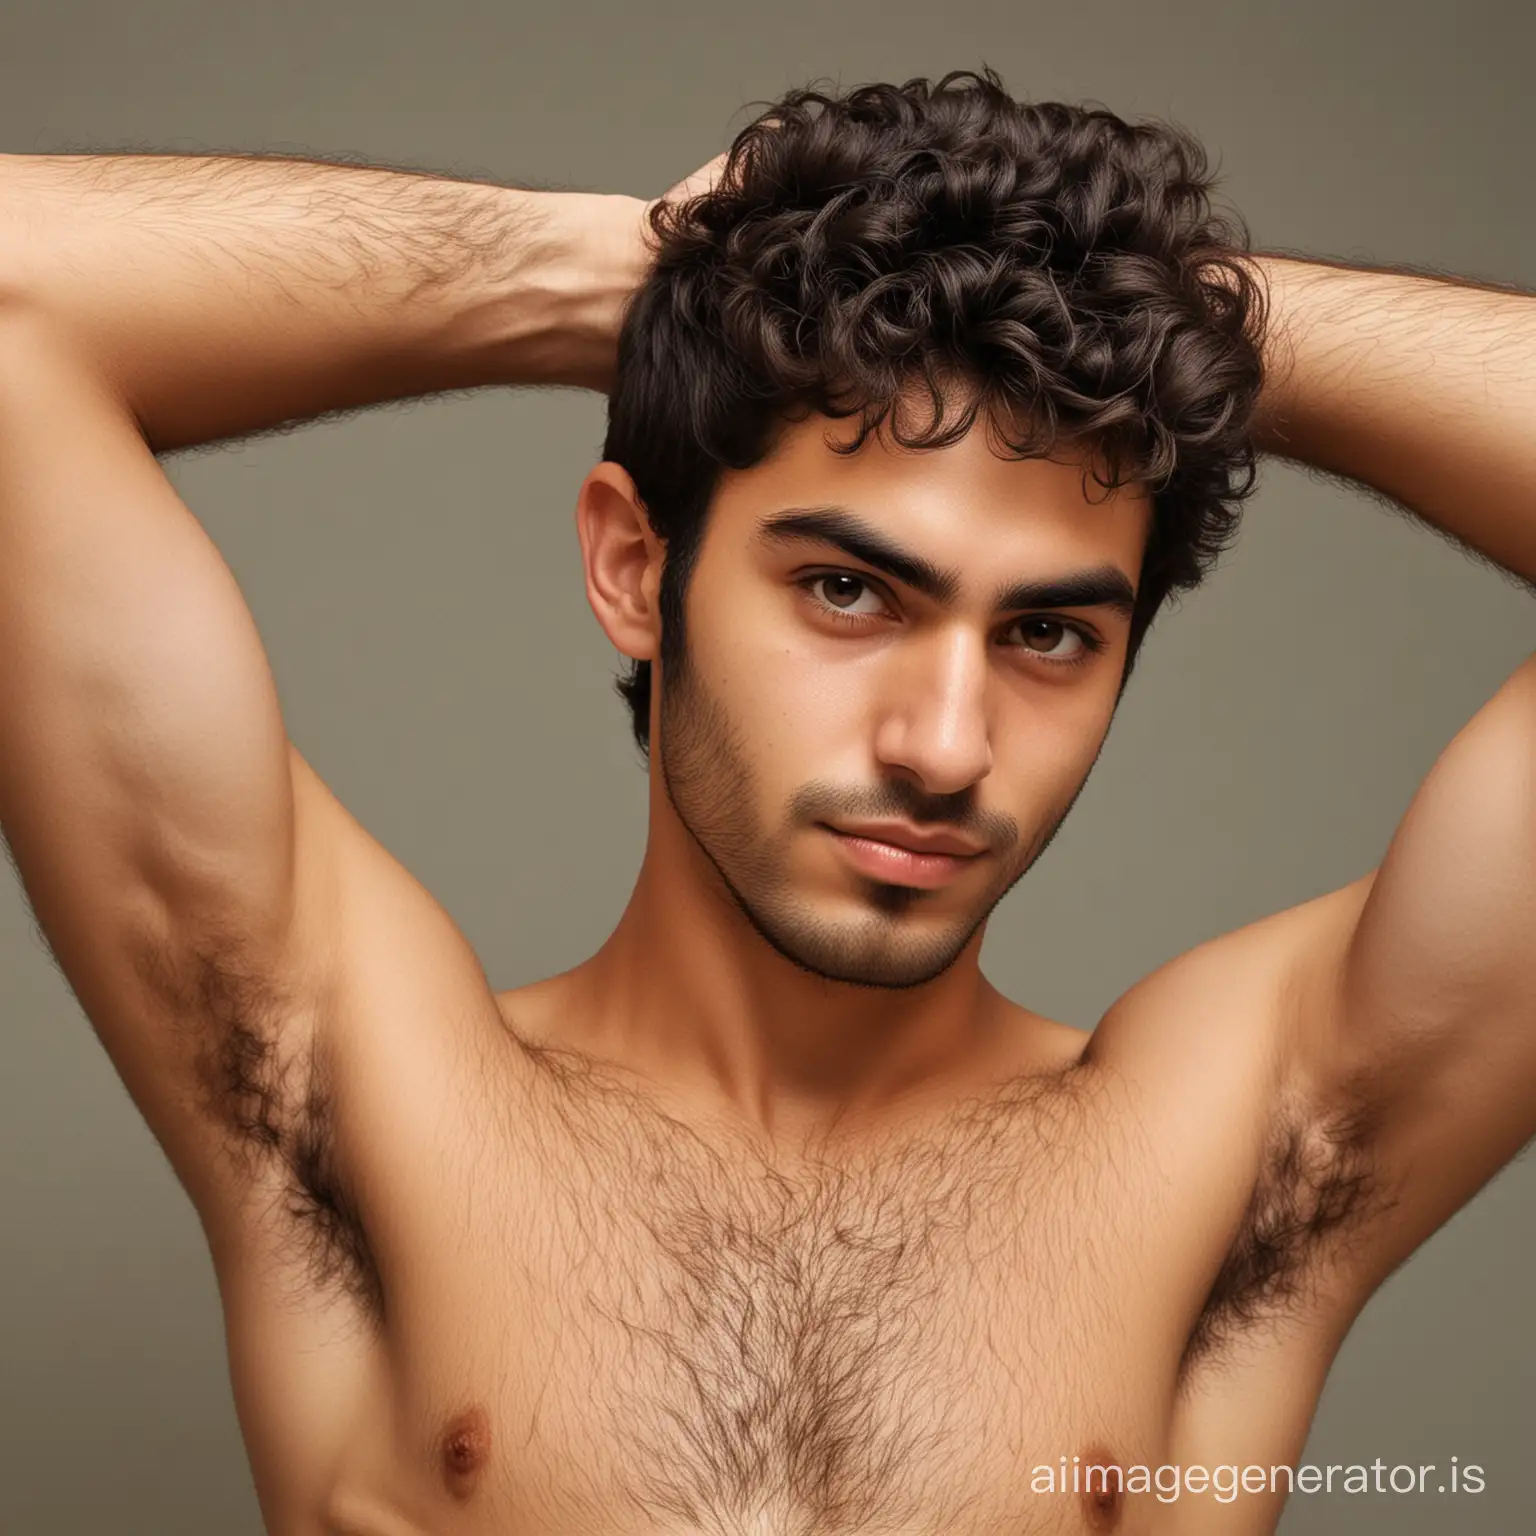 A nude young Iranian man with hairy armpits